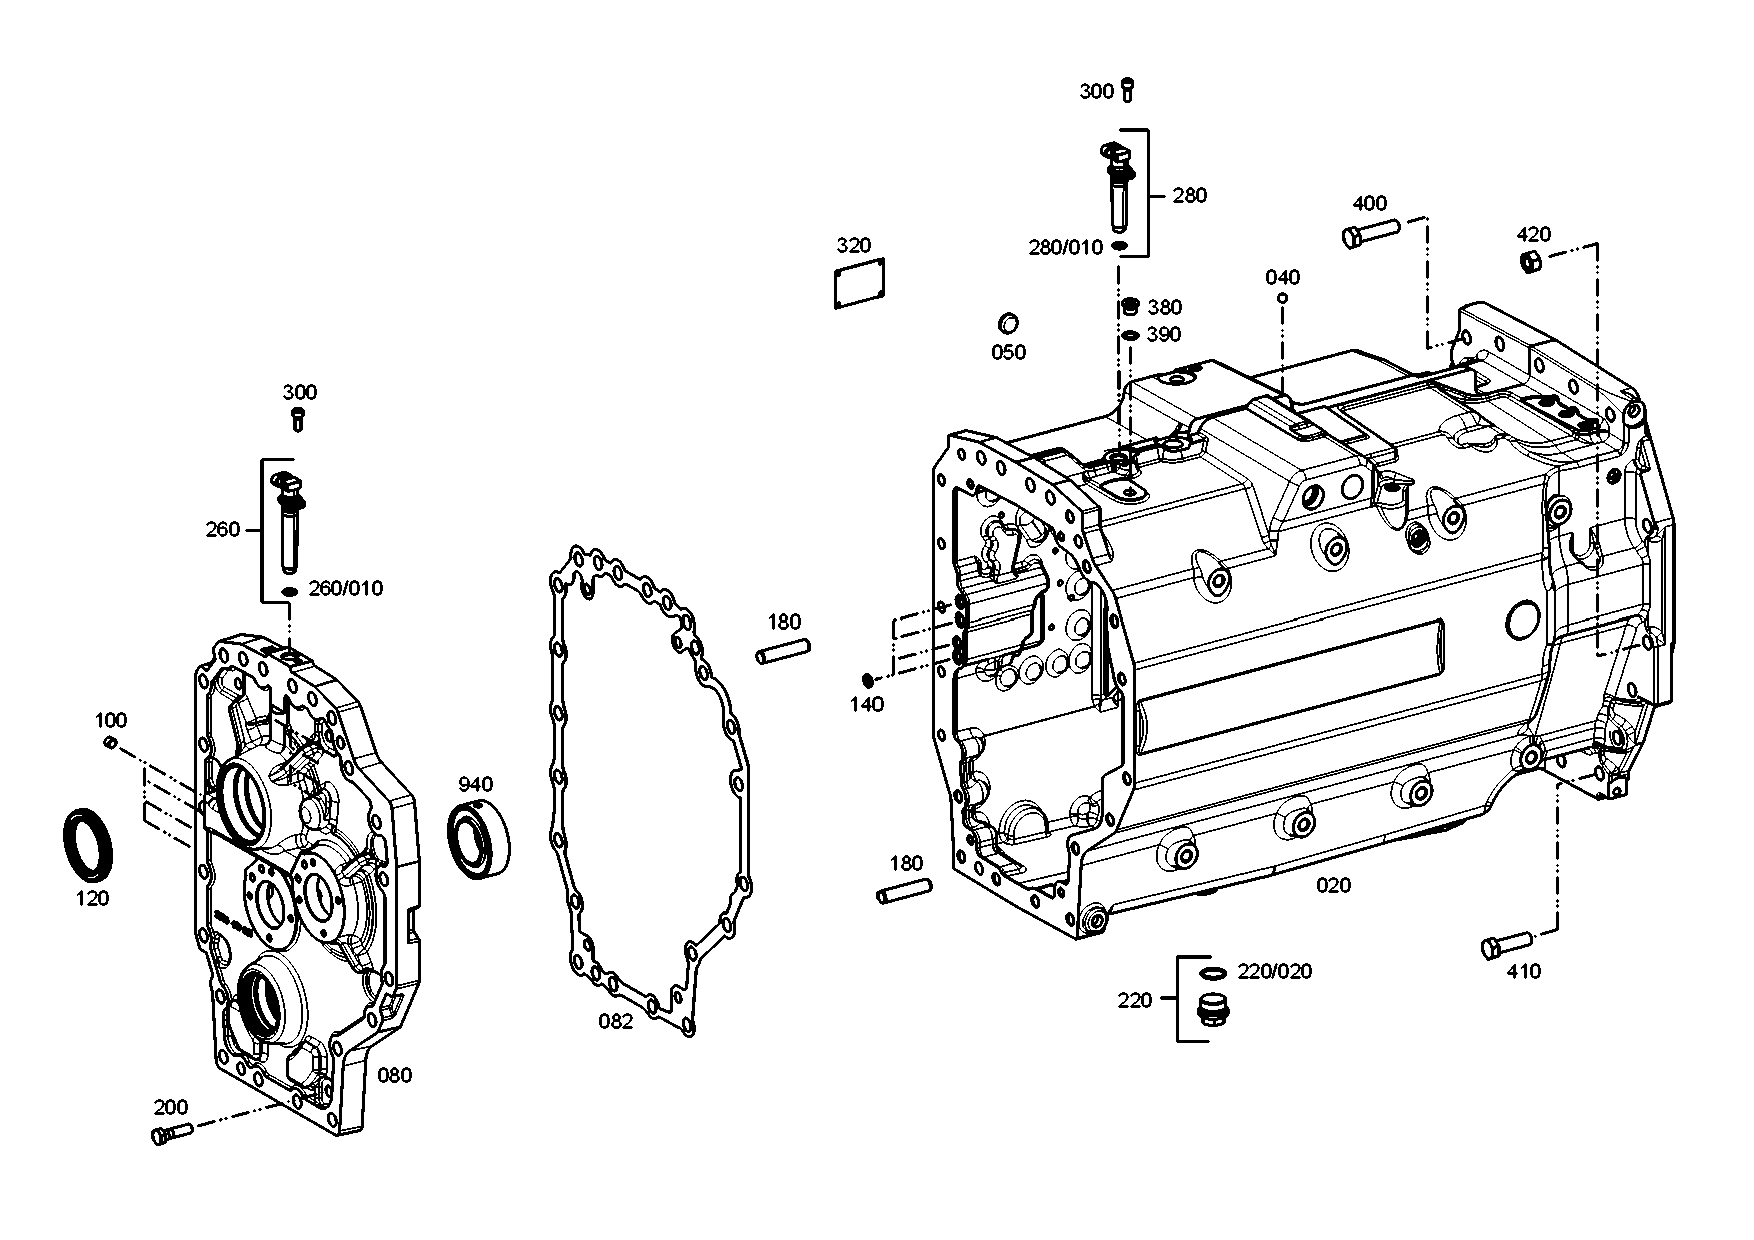 drawing for AGCO X486545900000 - HEXAGON SCREW